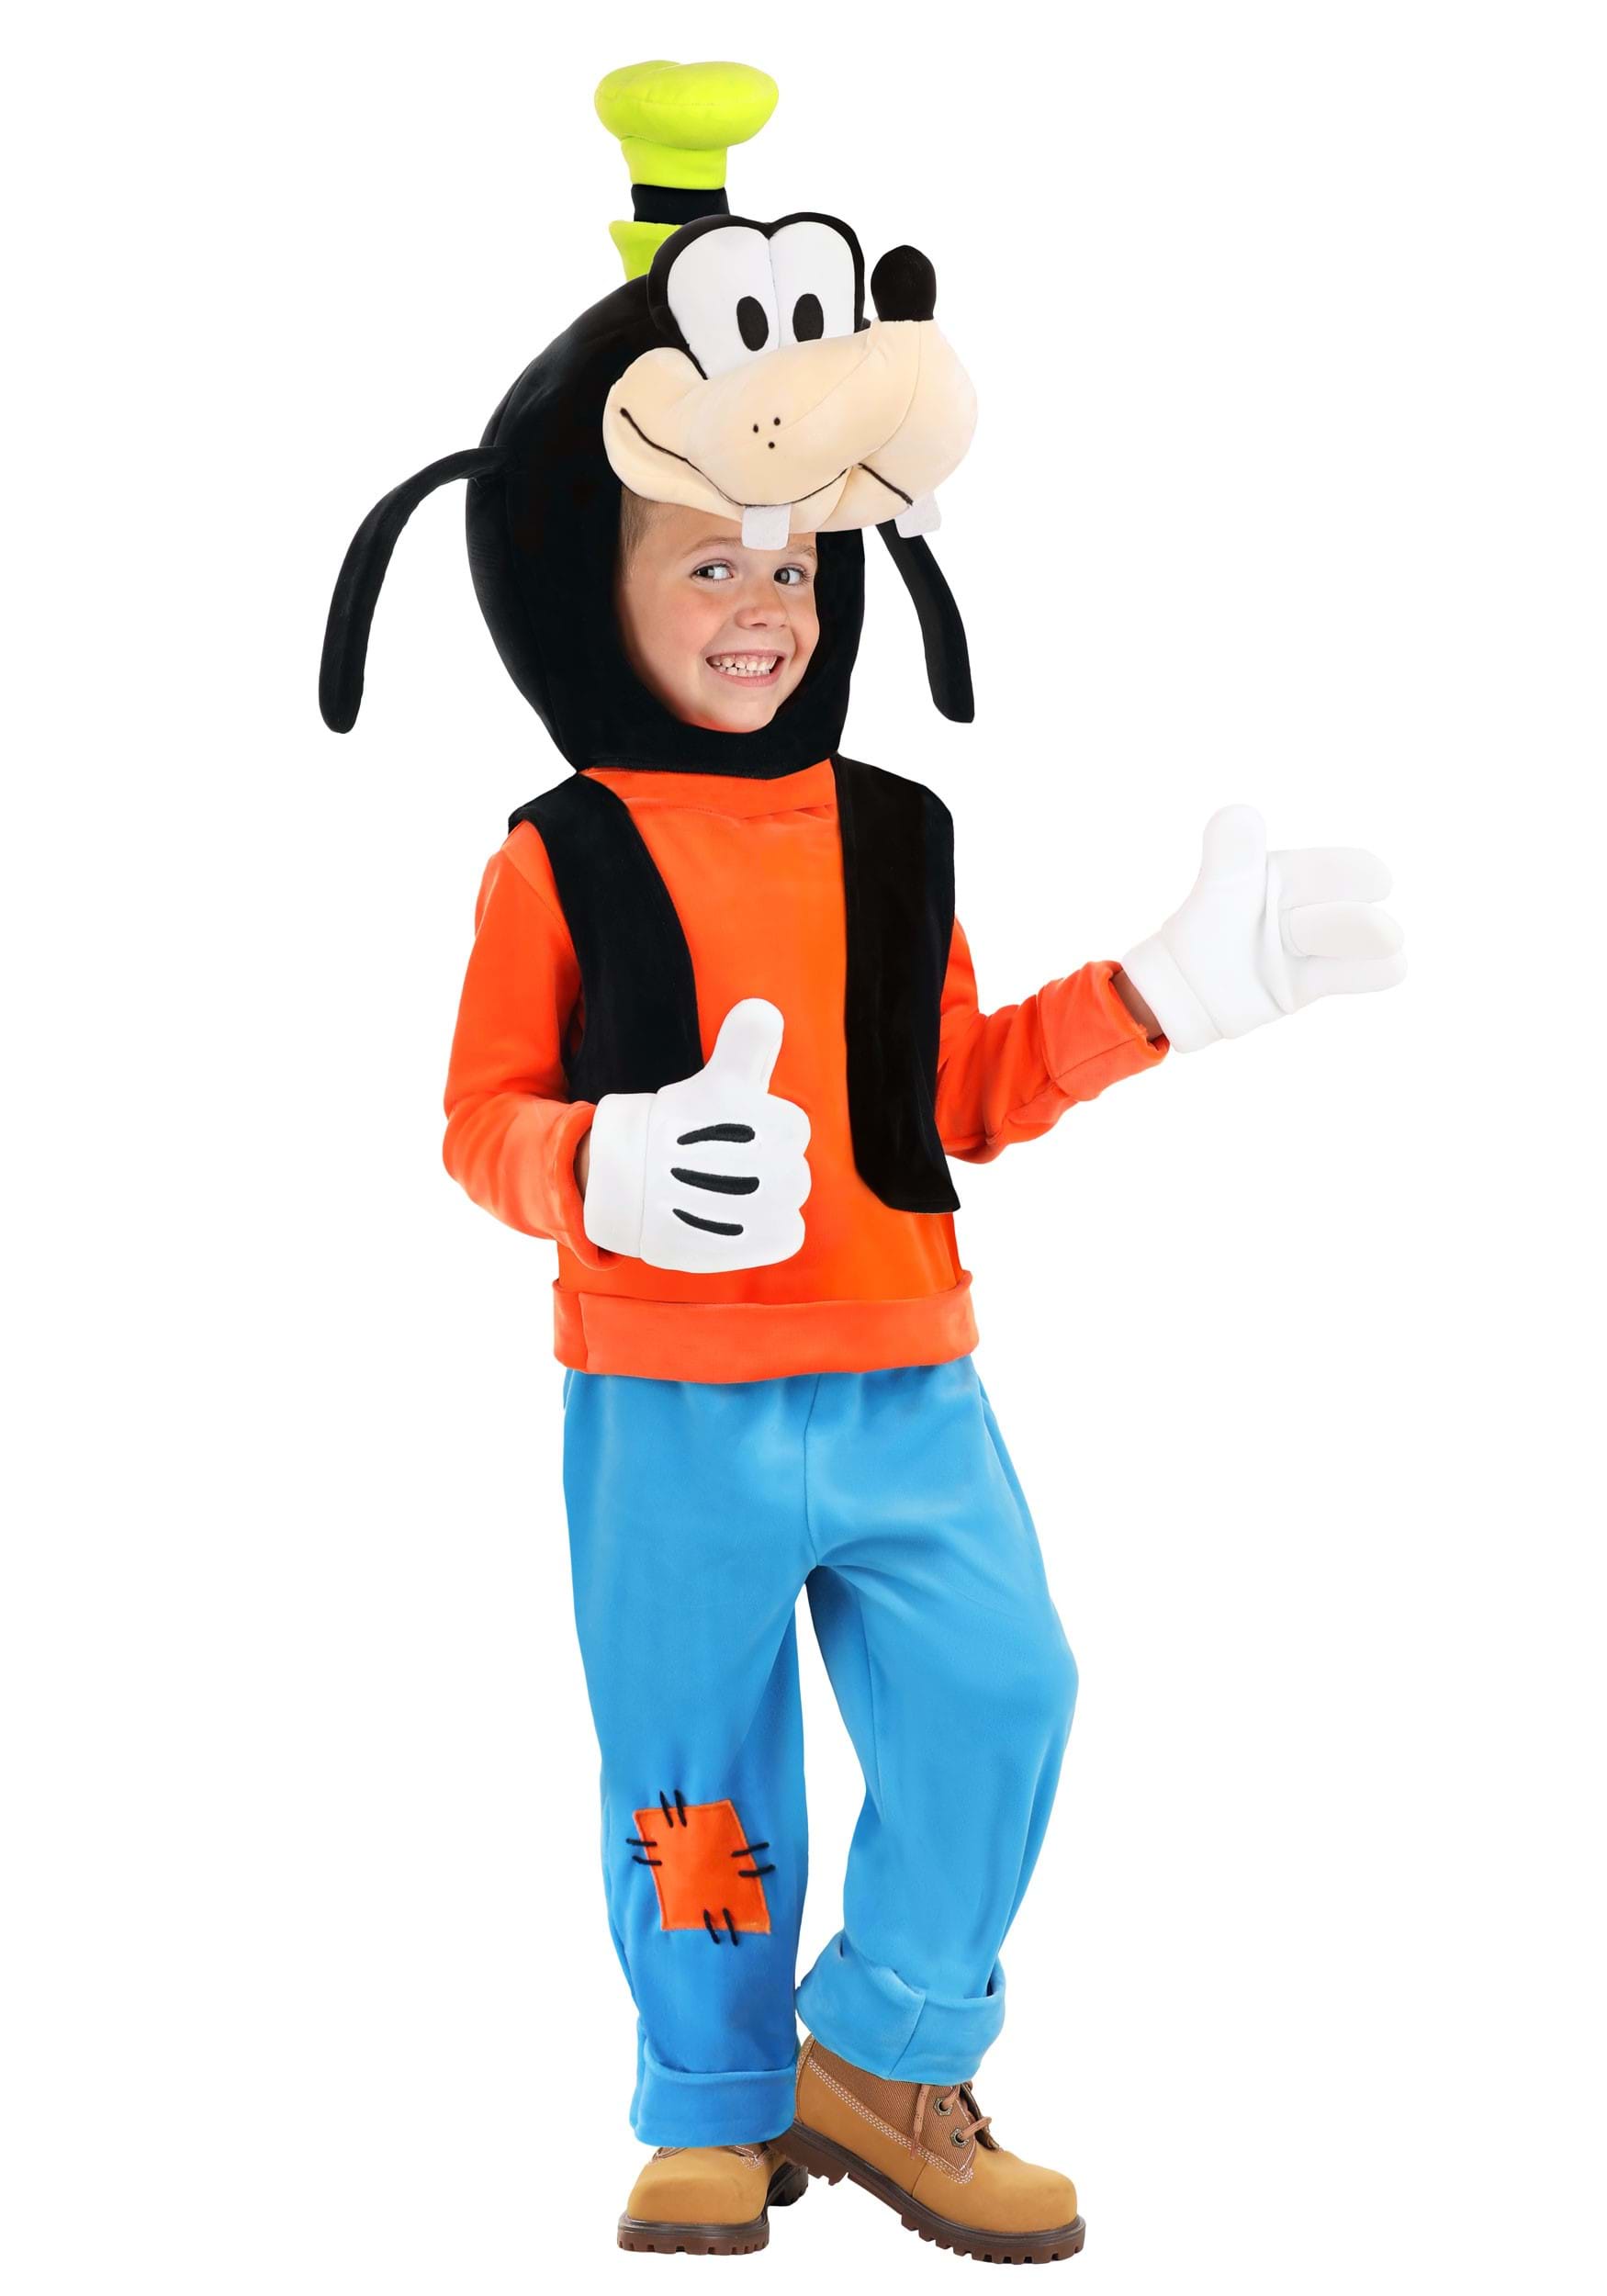 Photos - Fancy Dress Deluxe FUN Costumes  Goofy Costume for Toddlers | Disney Goofy Costume Blac 